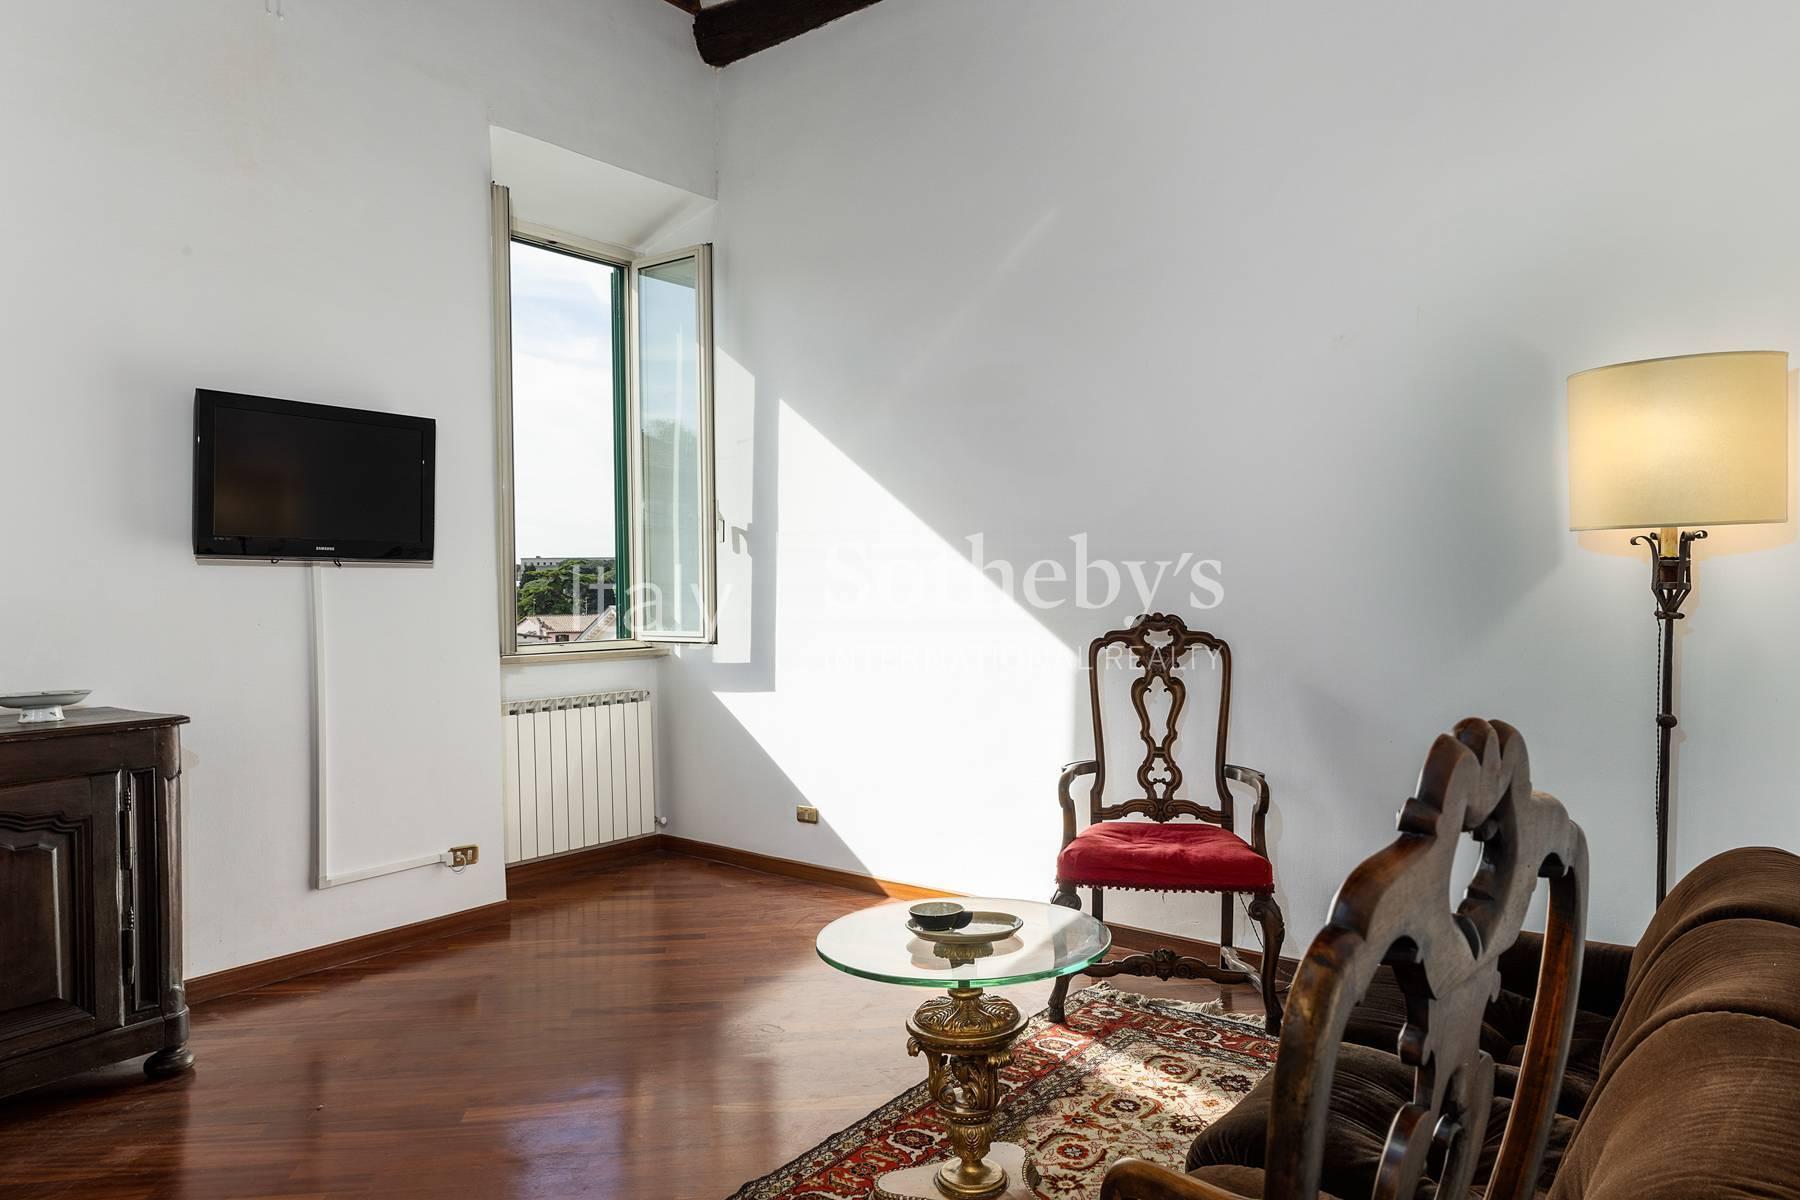 Stunning views for this bright flat close to the Colosseum - 14